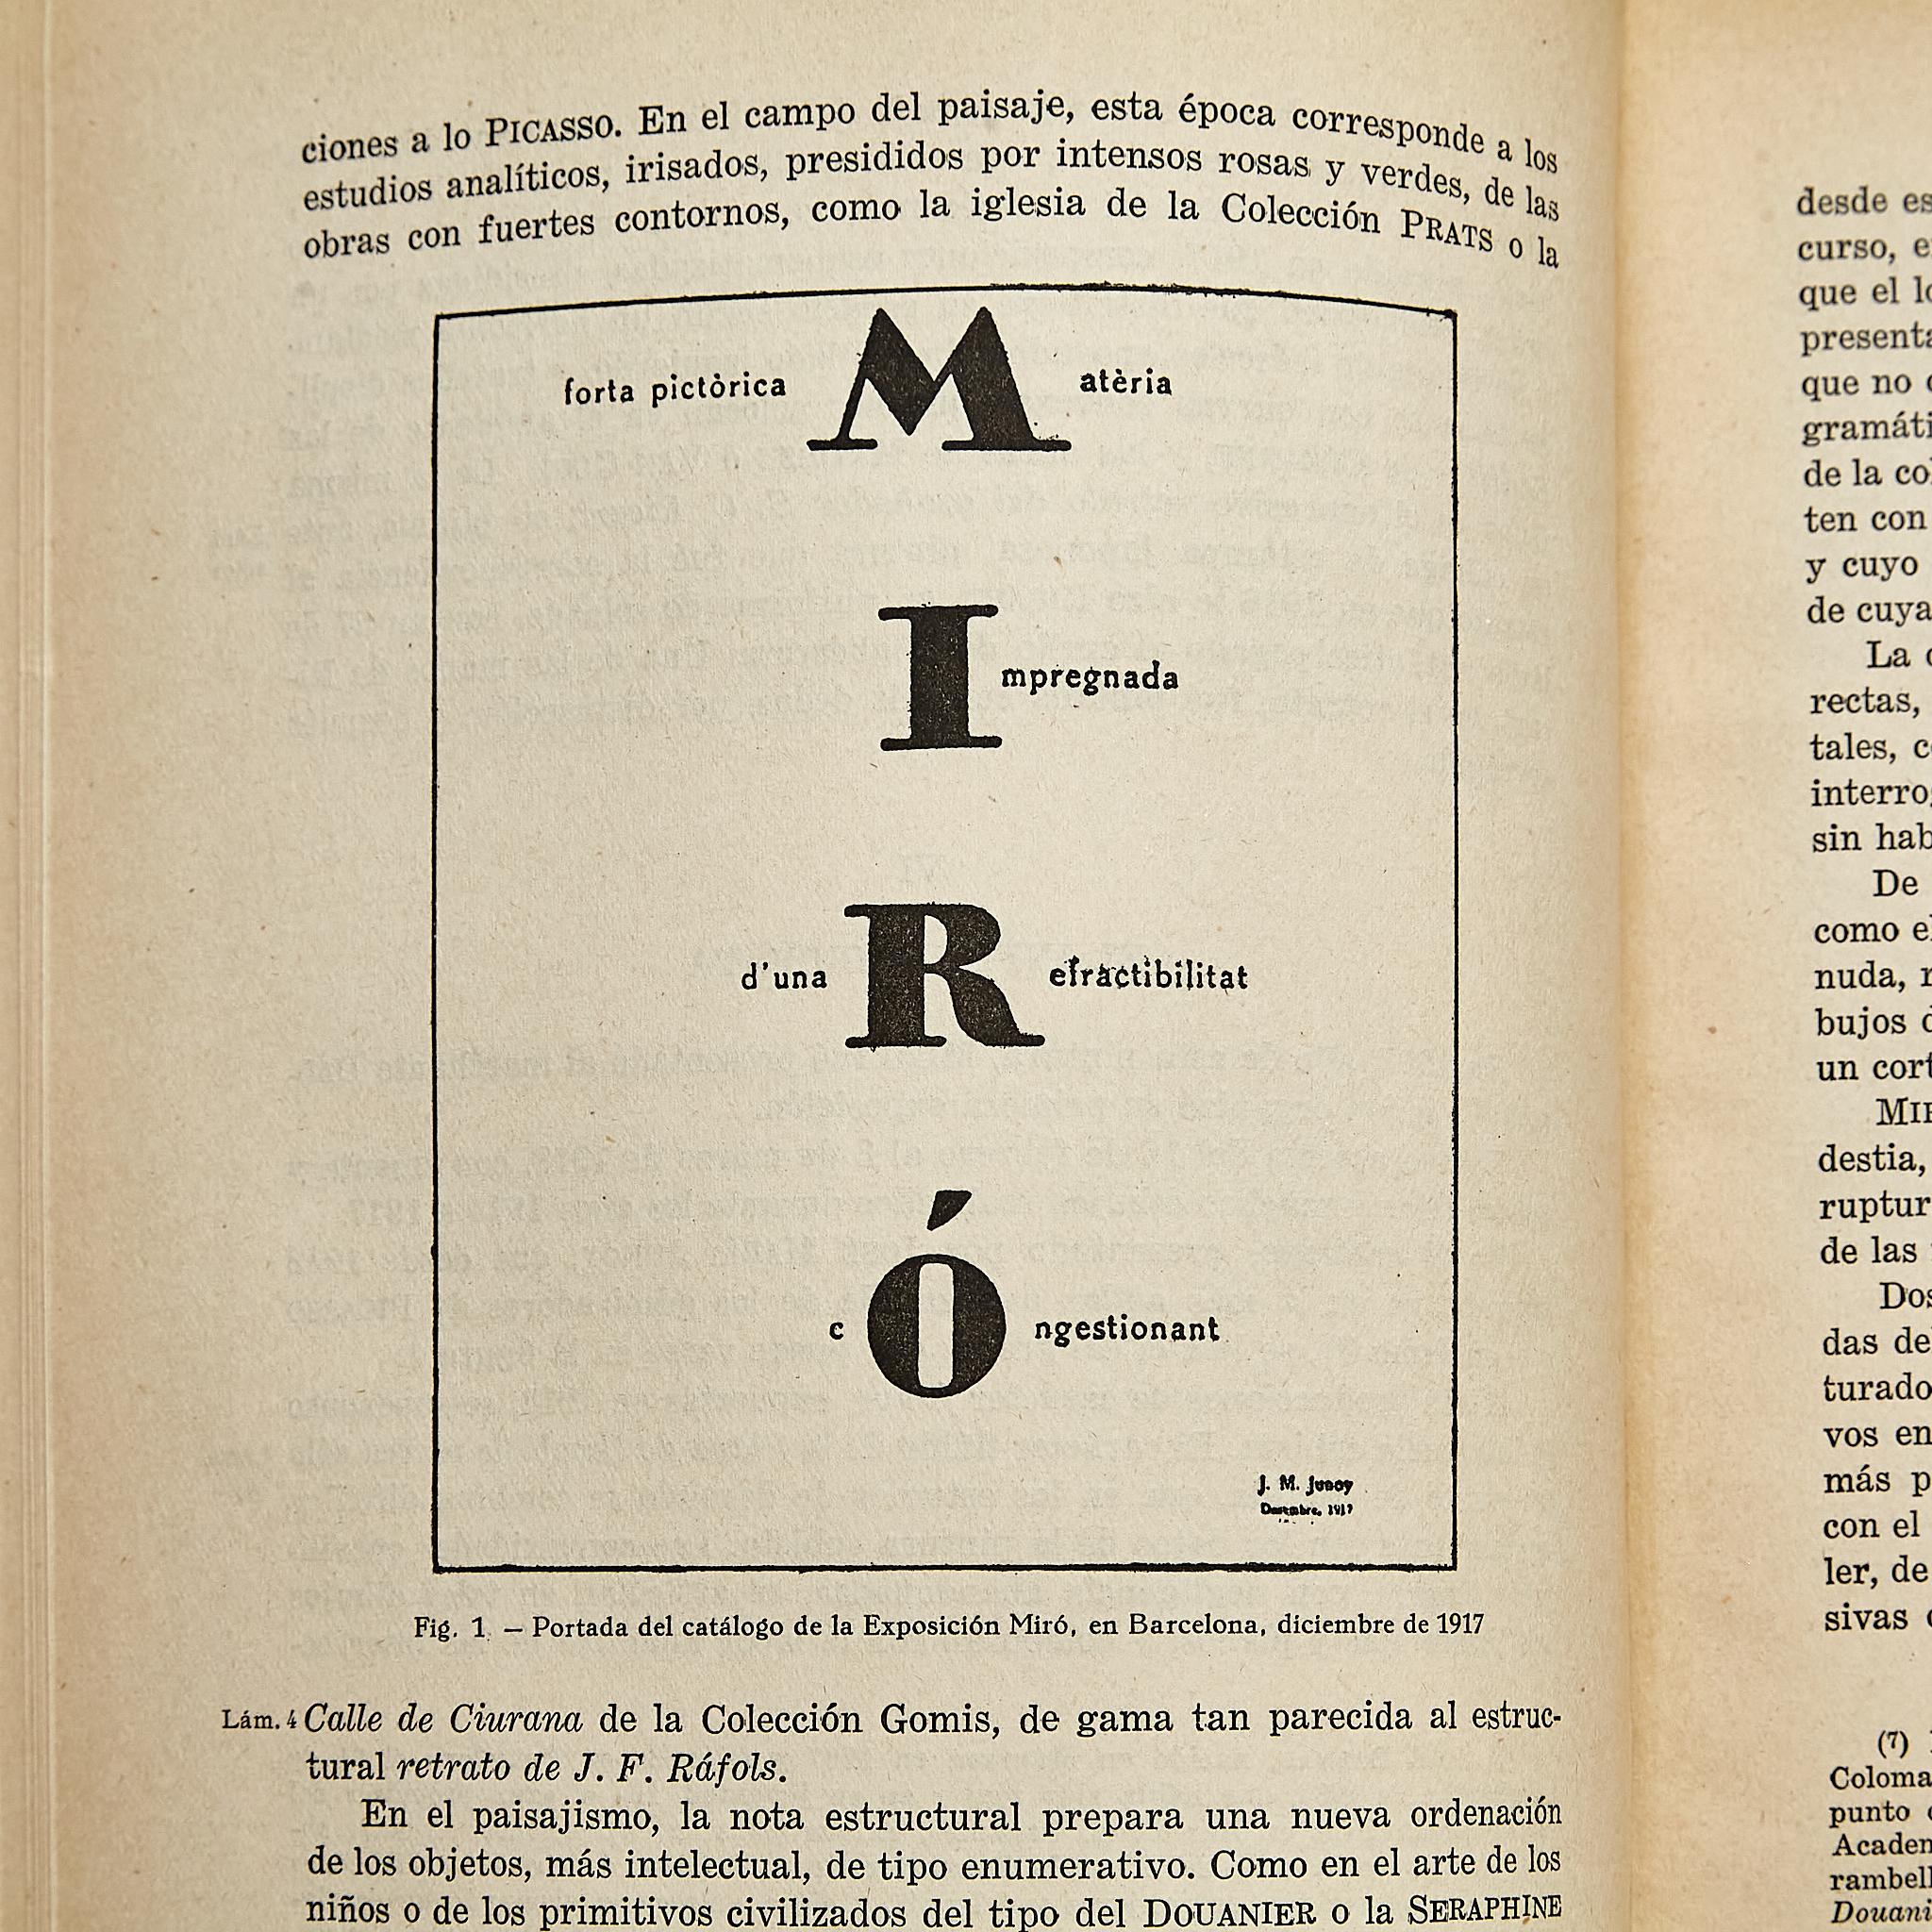 'Miró y la Imaginación' book of Joan Miró.
Published by Ediciones Omega in Barcelona (Spain).

Edition of 1949 with six photography’s in color and 60 in black and white.

In good original condition, with consistent with age and use, preserving a